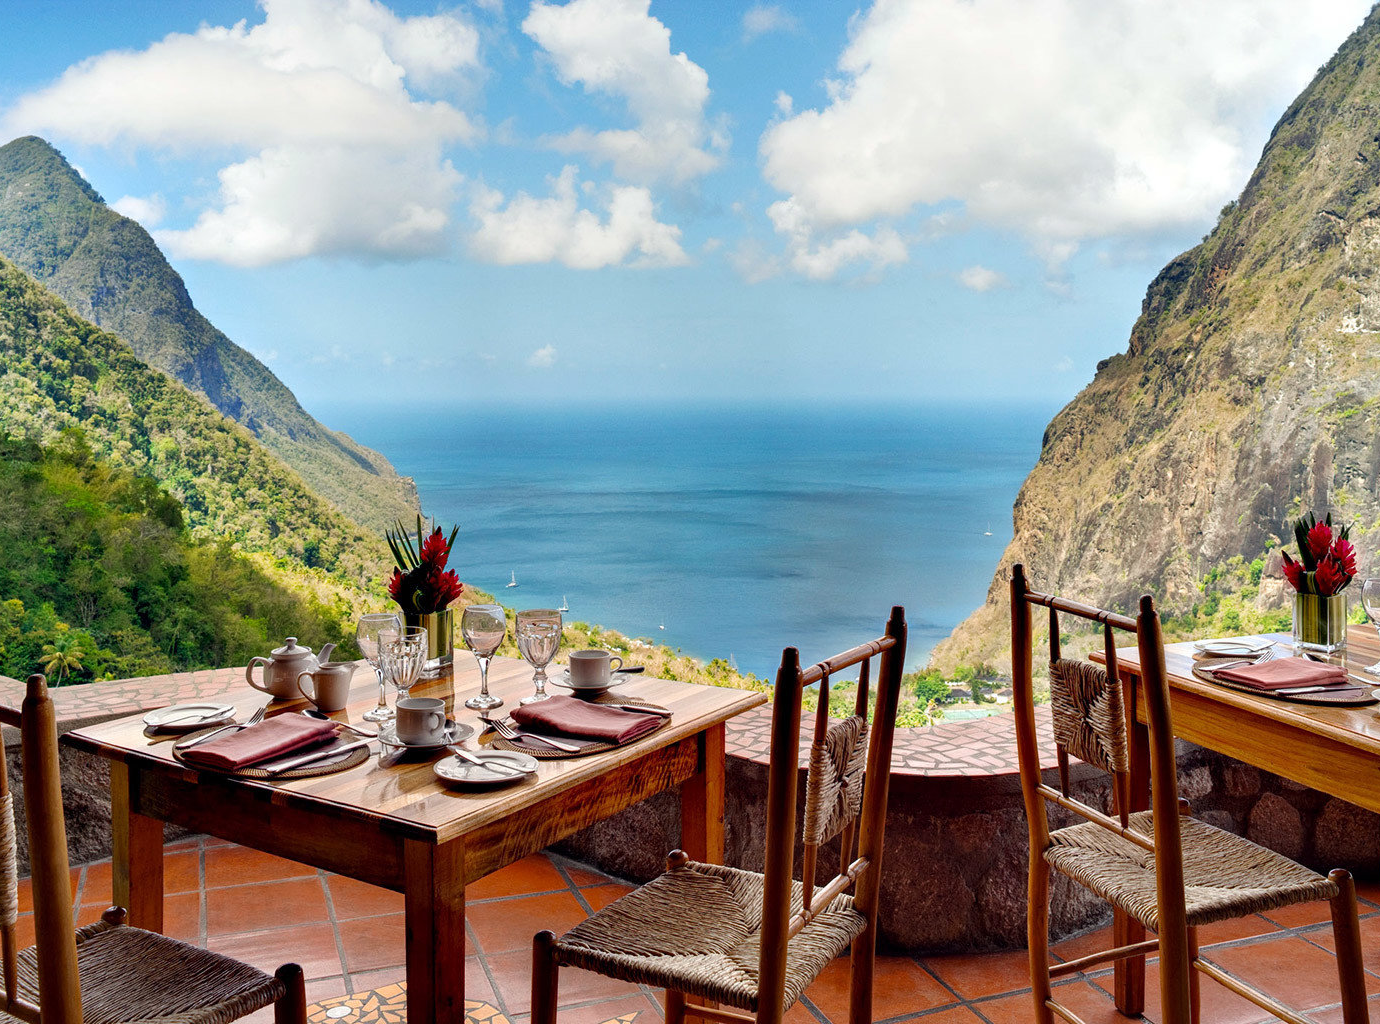 Outdoor seating overlooking beautiful blue water and pointy mountains at Ladera Resort